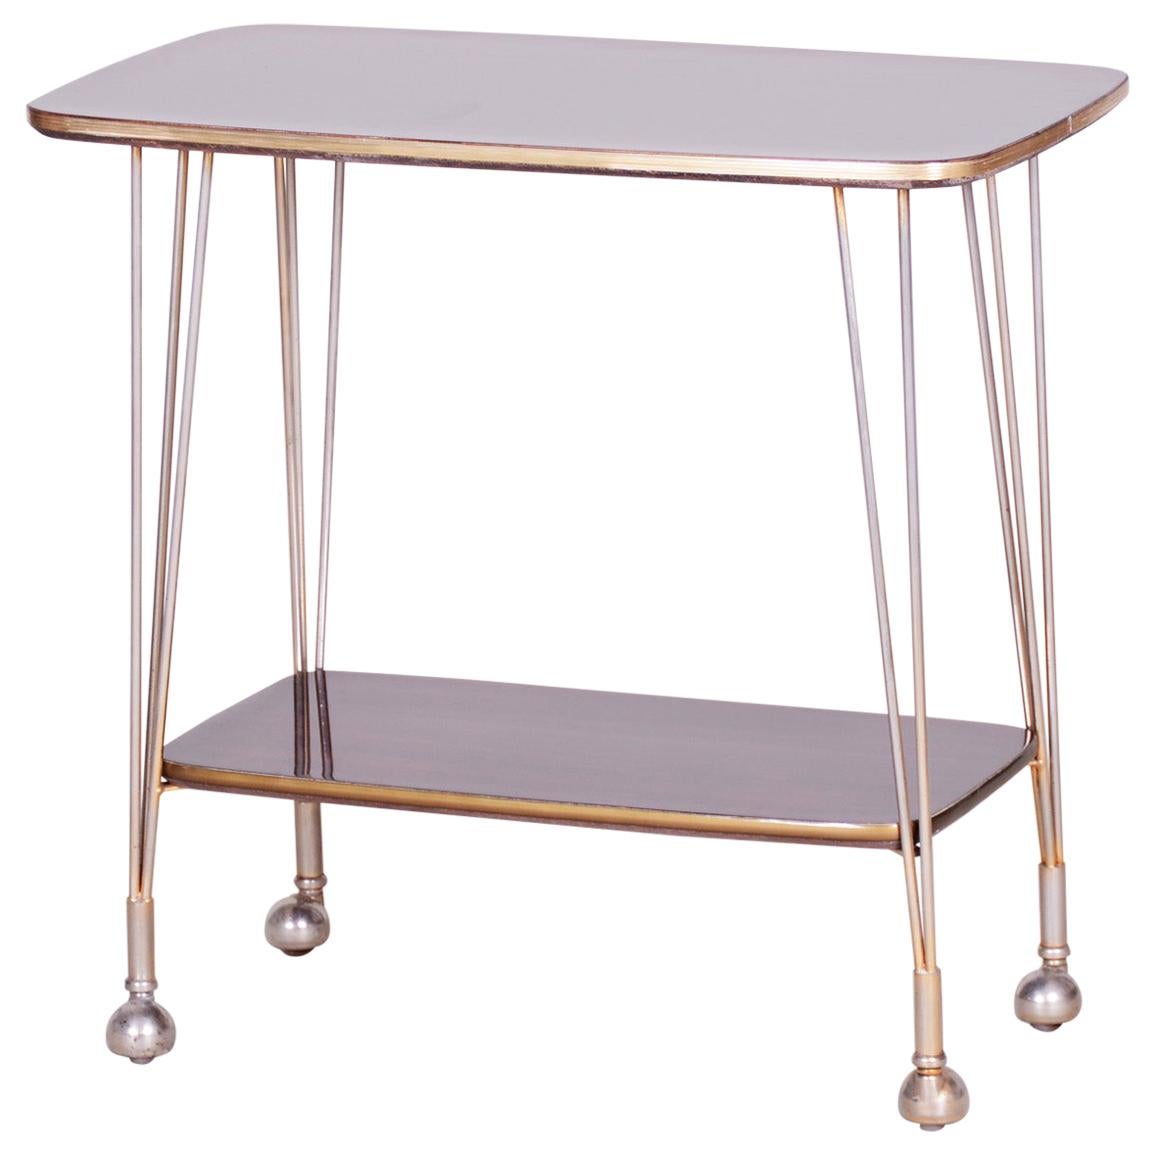 20th Century Art Deco Mahogany Trolley Table, Brass, Excellent Condition, 1950s For Sale